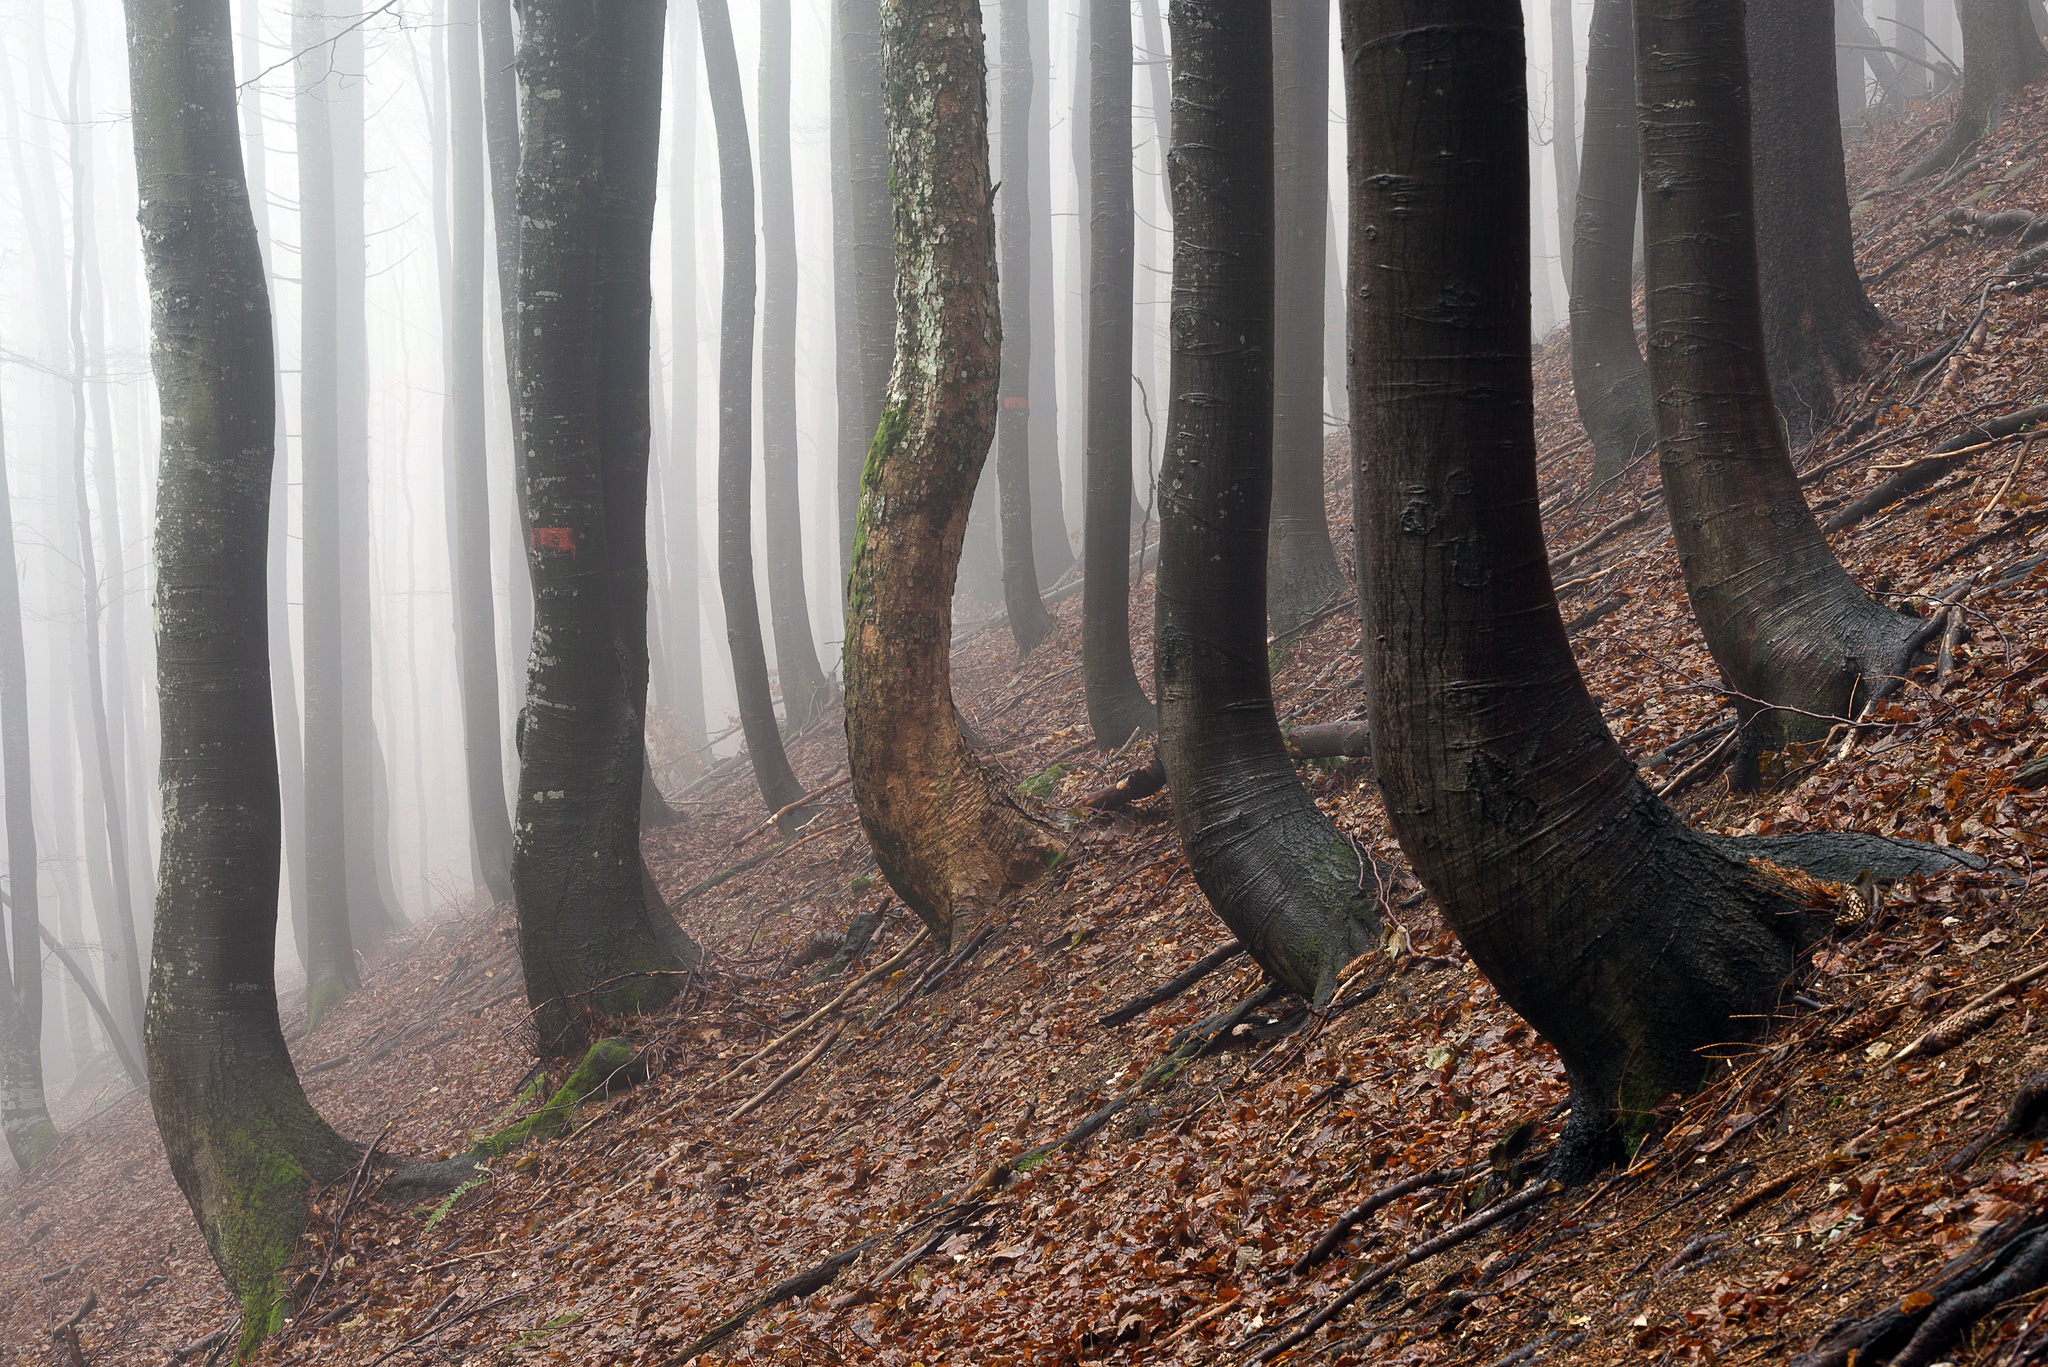 General 2048x1367 forest trees nature mist